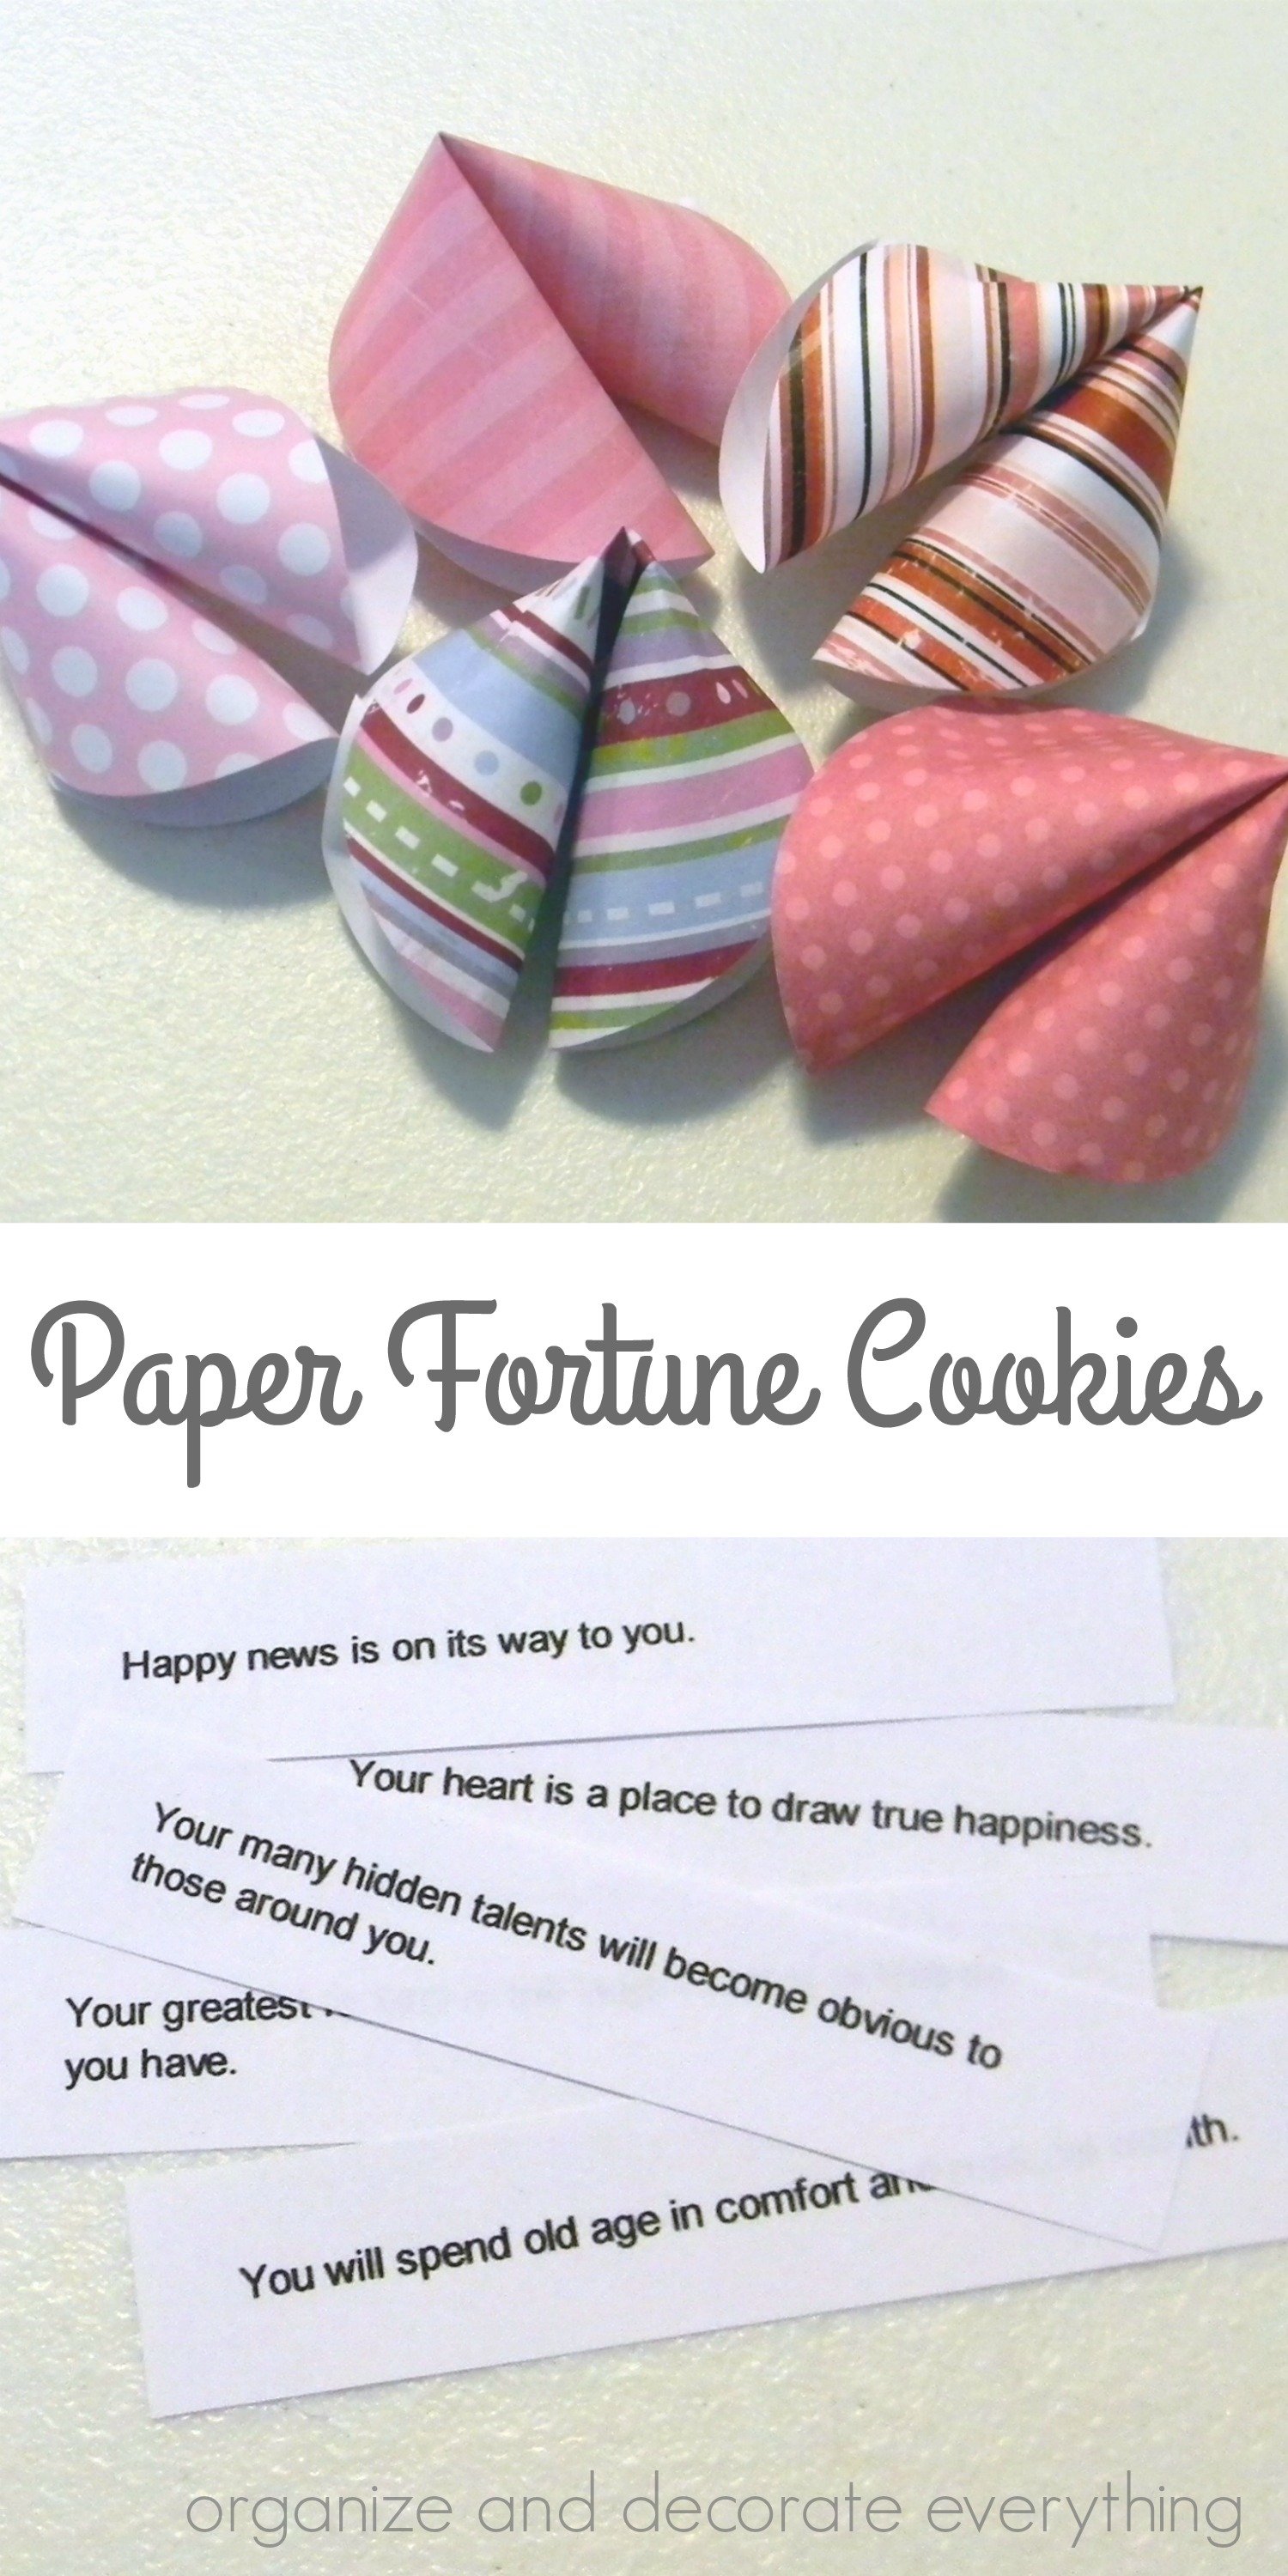 https://organizeyourstuffnow.com/wp-content/uploads/2012/02/Paper-Fortune-Cookies-for-Valentines-Day-or-Chinese-New-Year.jpg